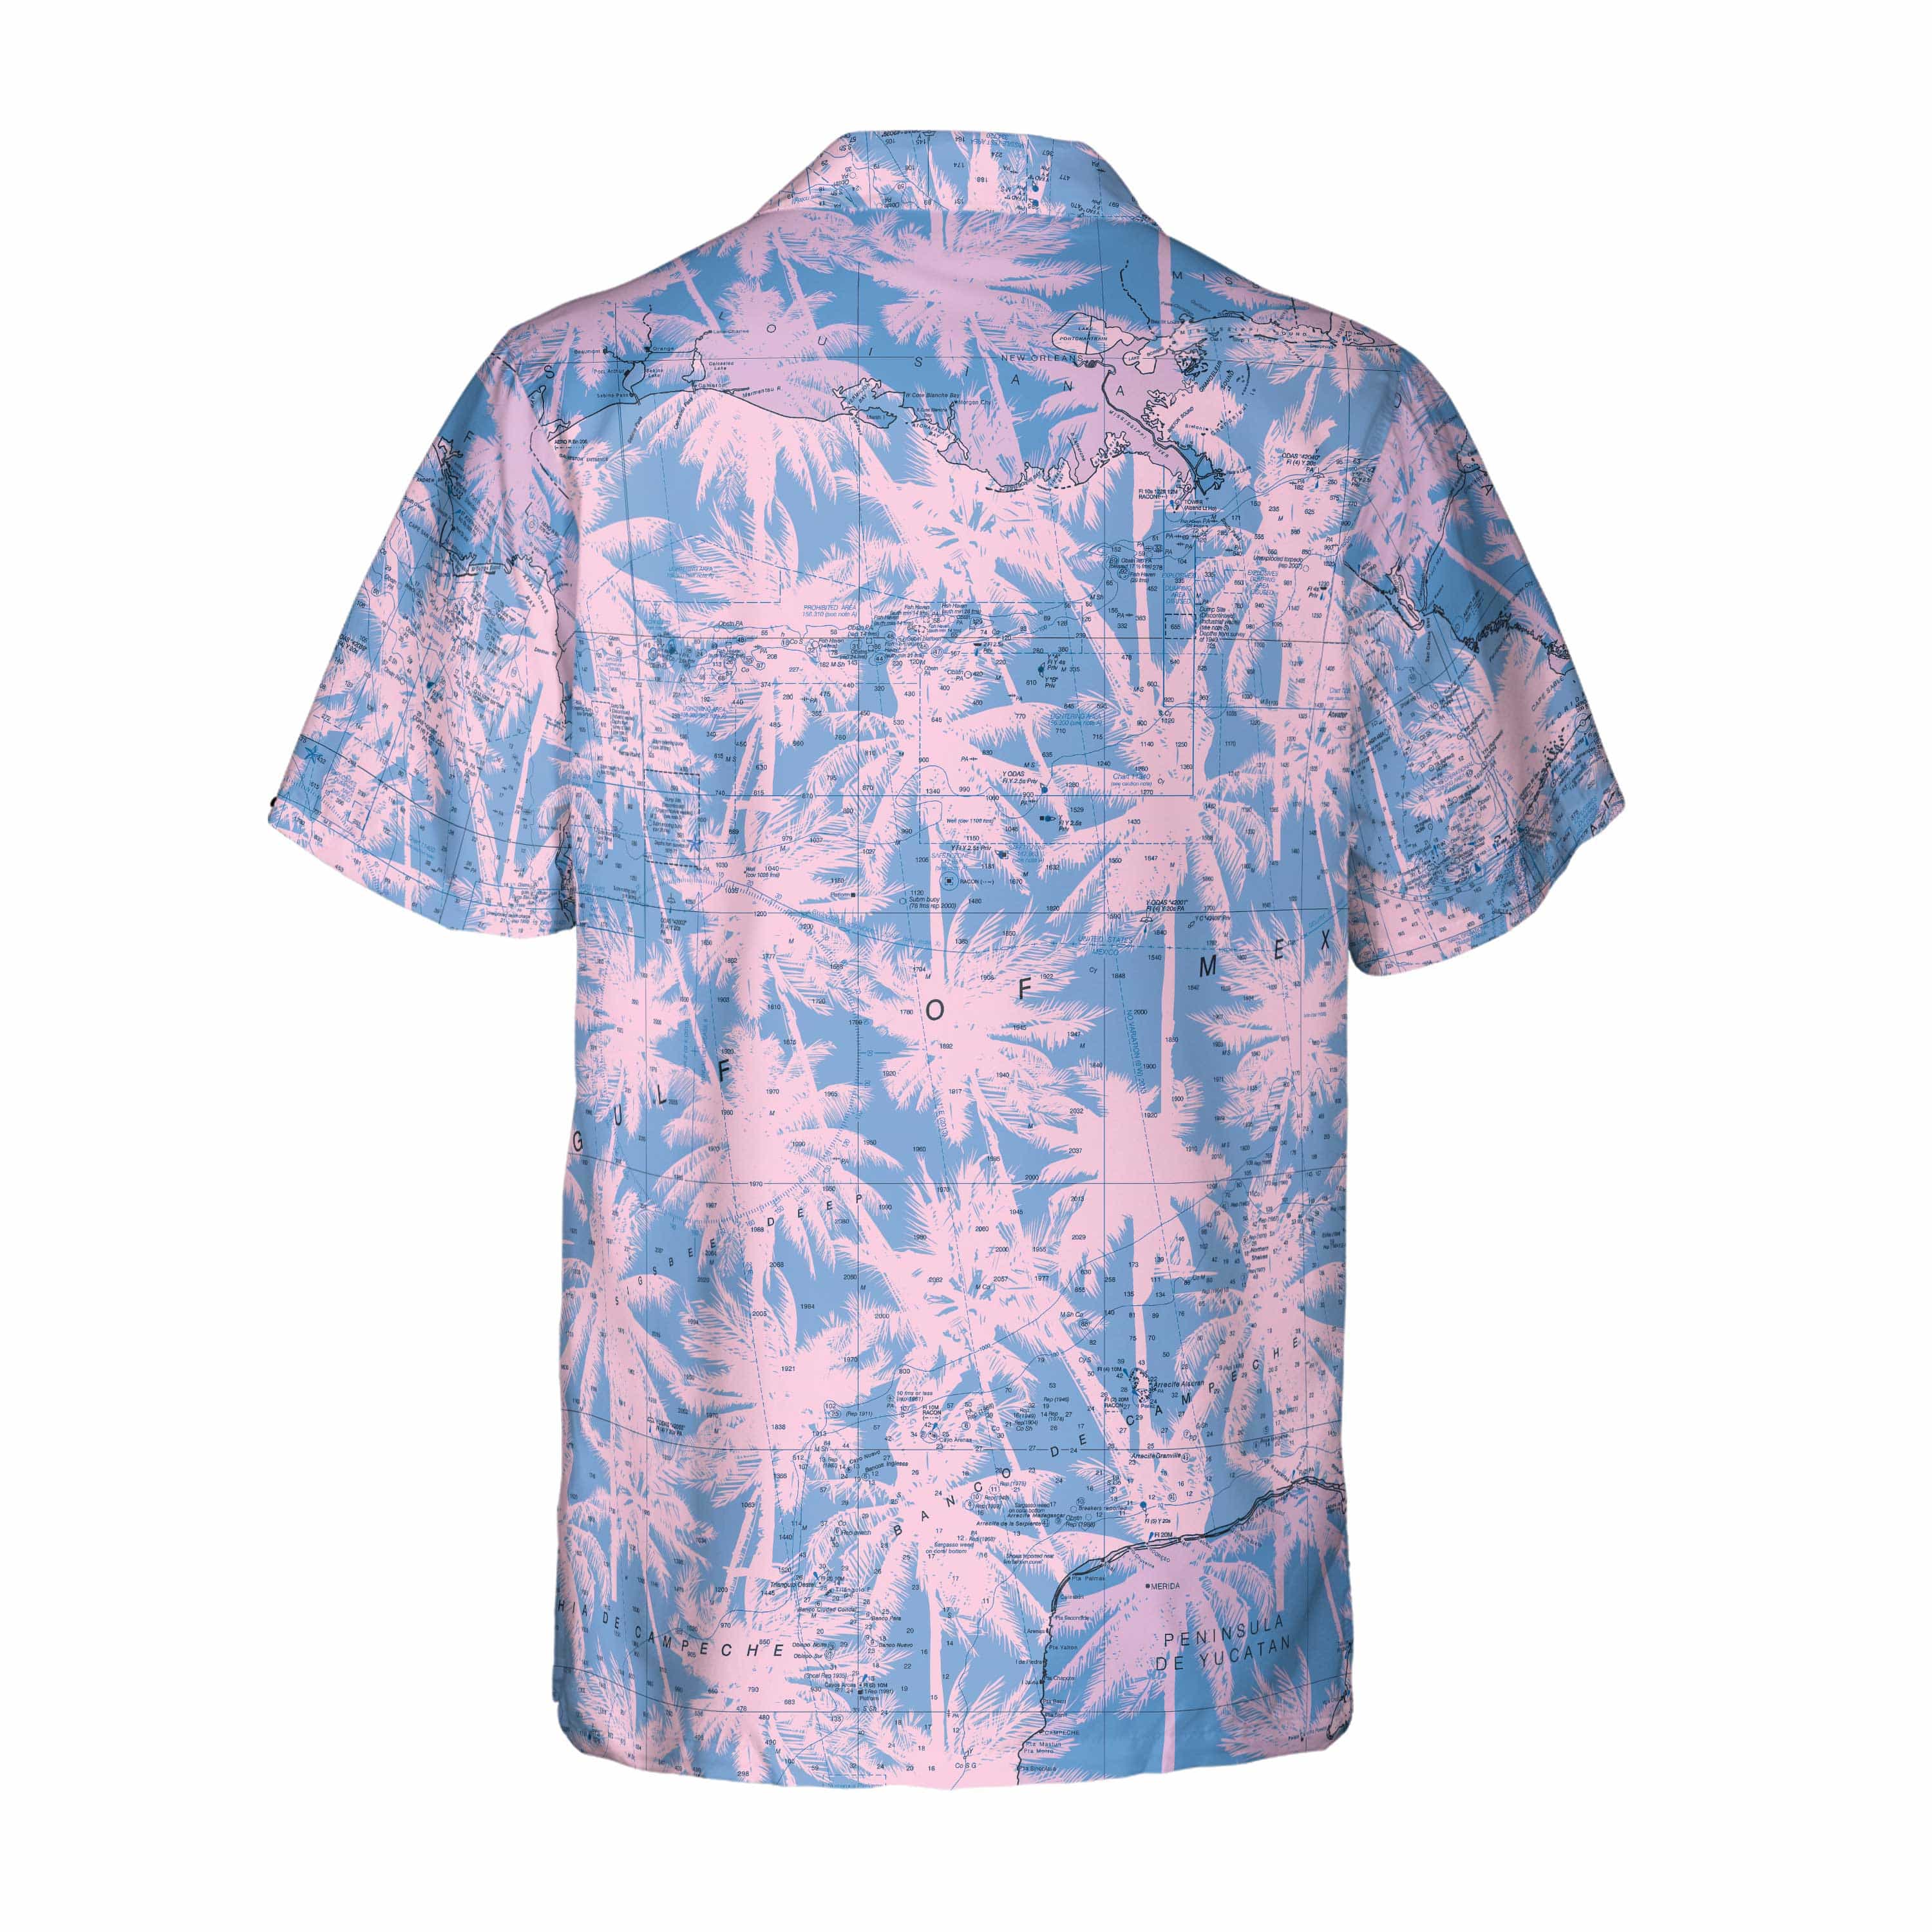 The Blue Palms Gulf of Mexico Shirt